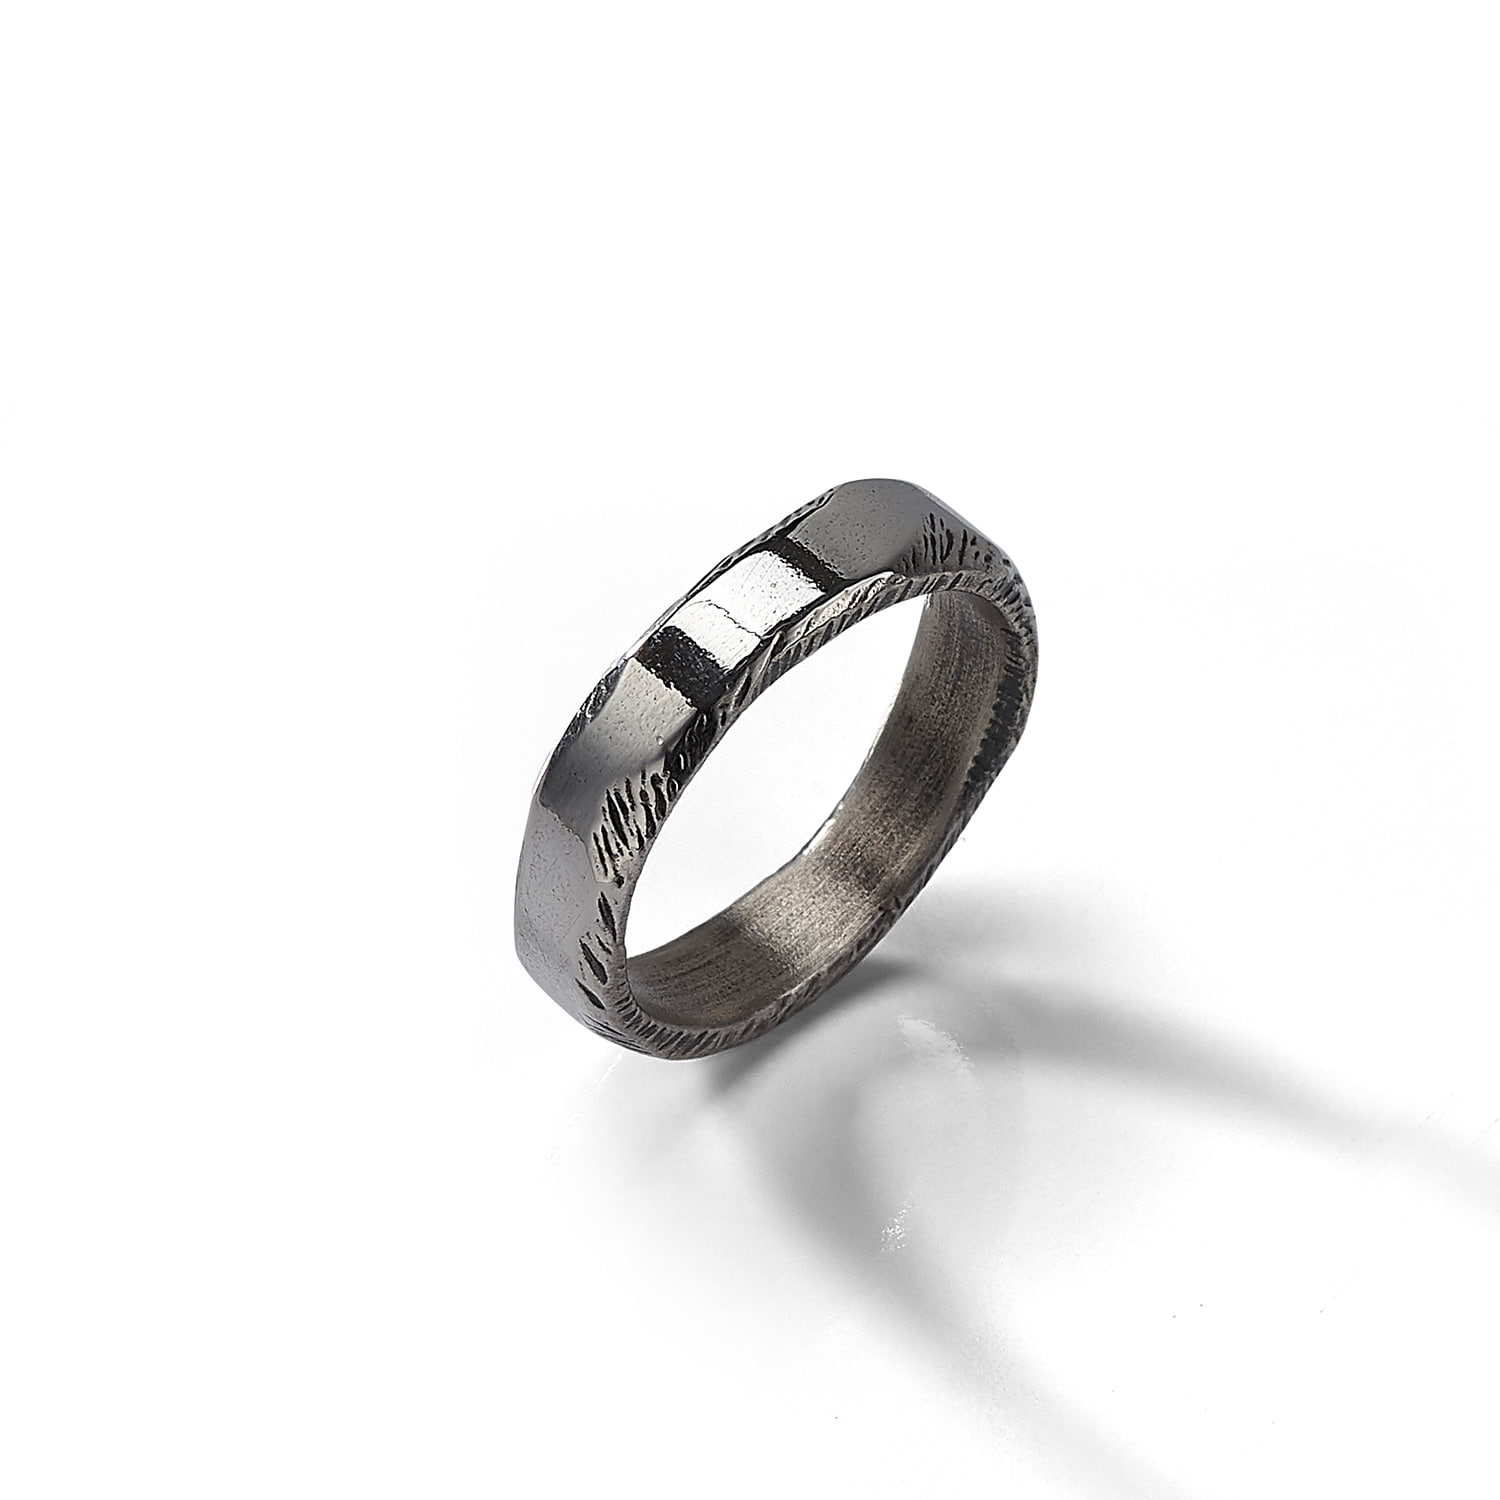 TEXTURE RING - 002